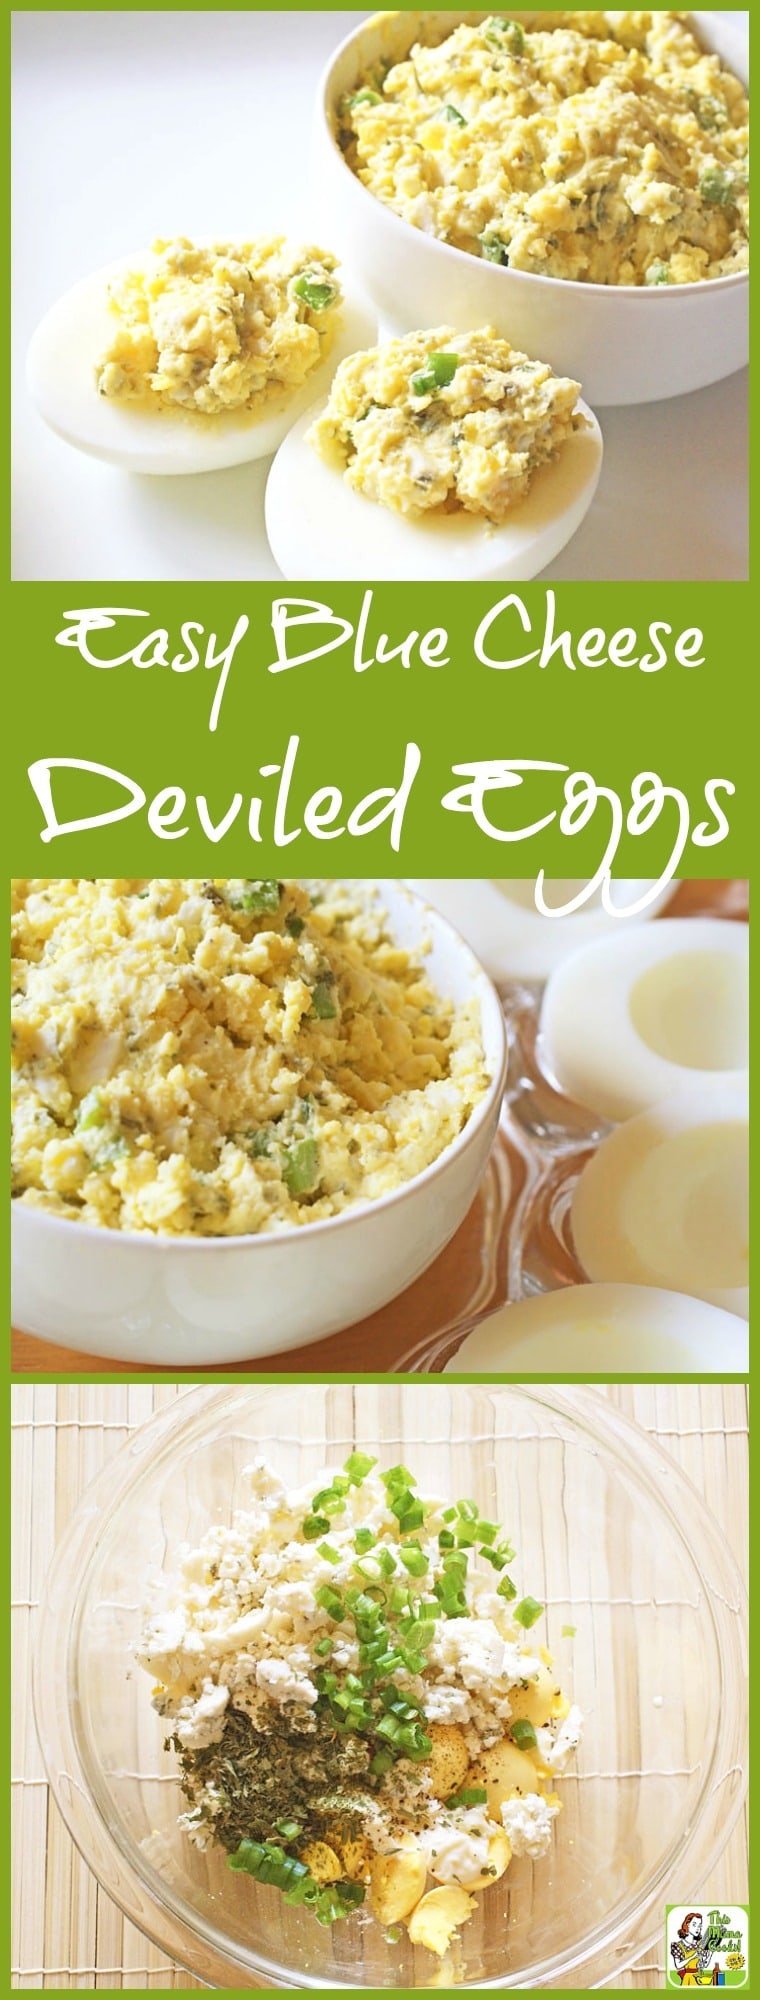 Collage of blue cheese deviled eggs on plates and in bowls.